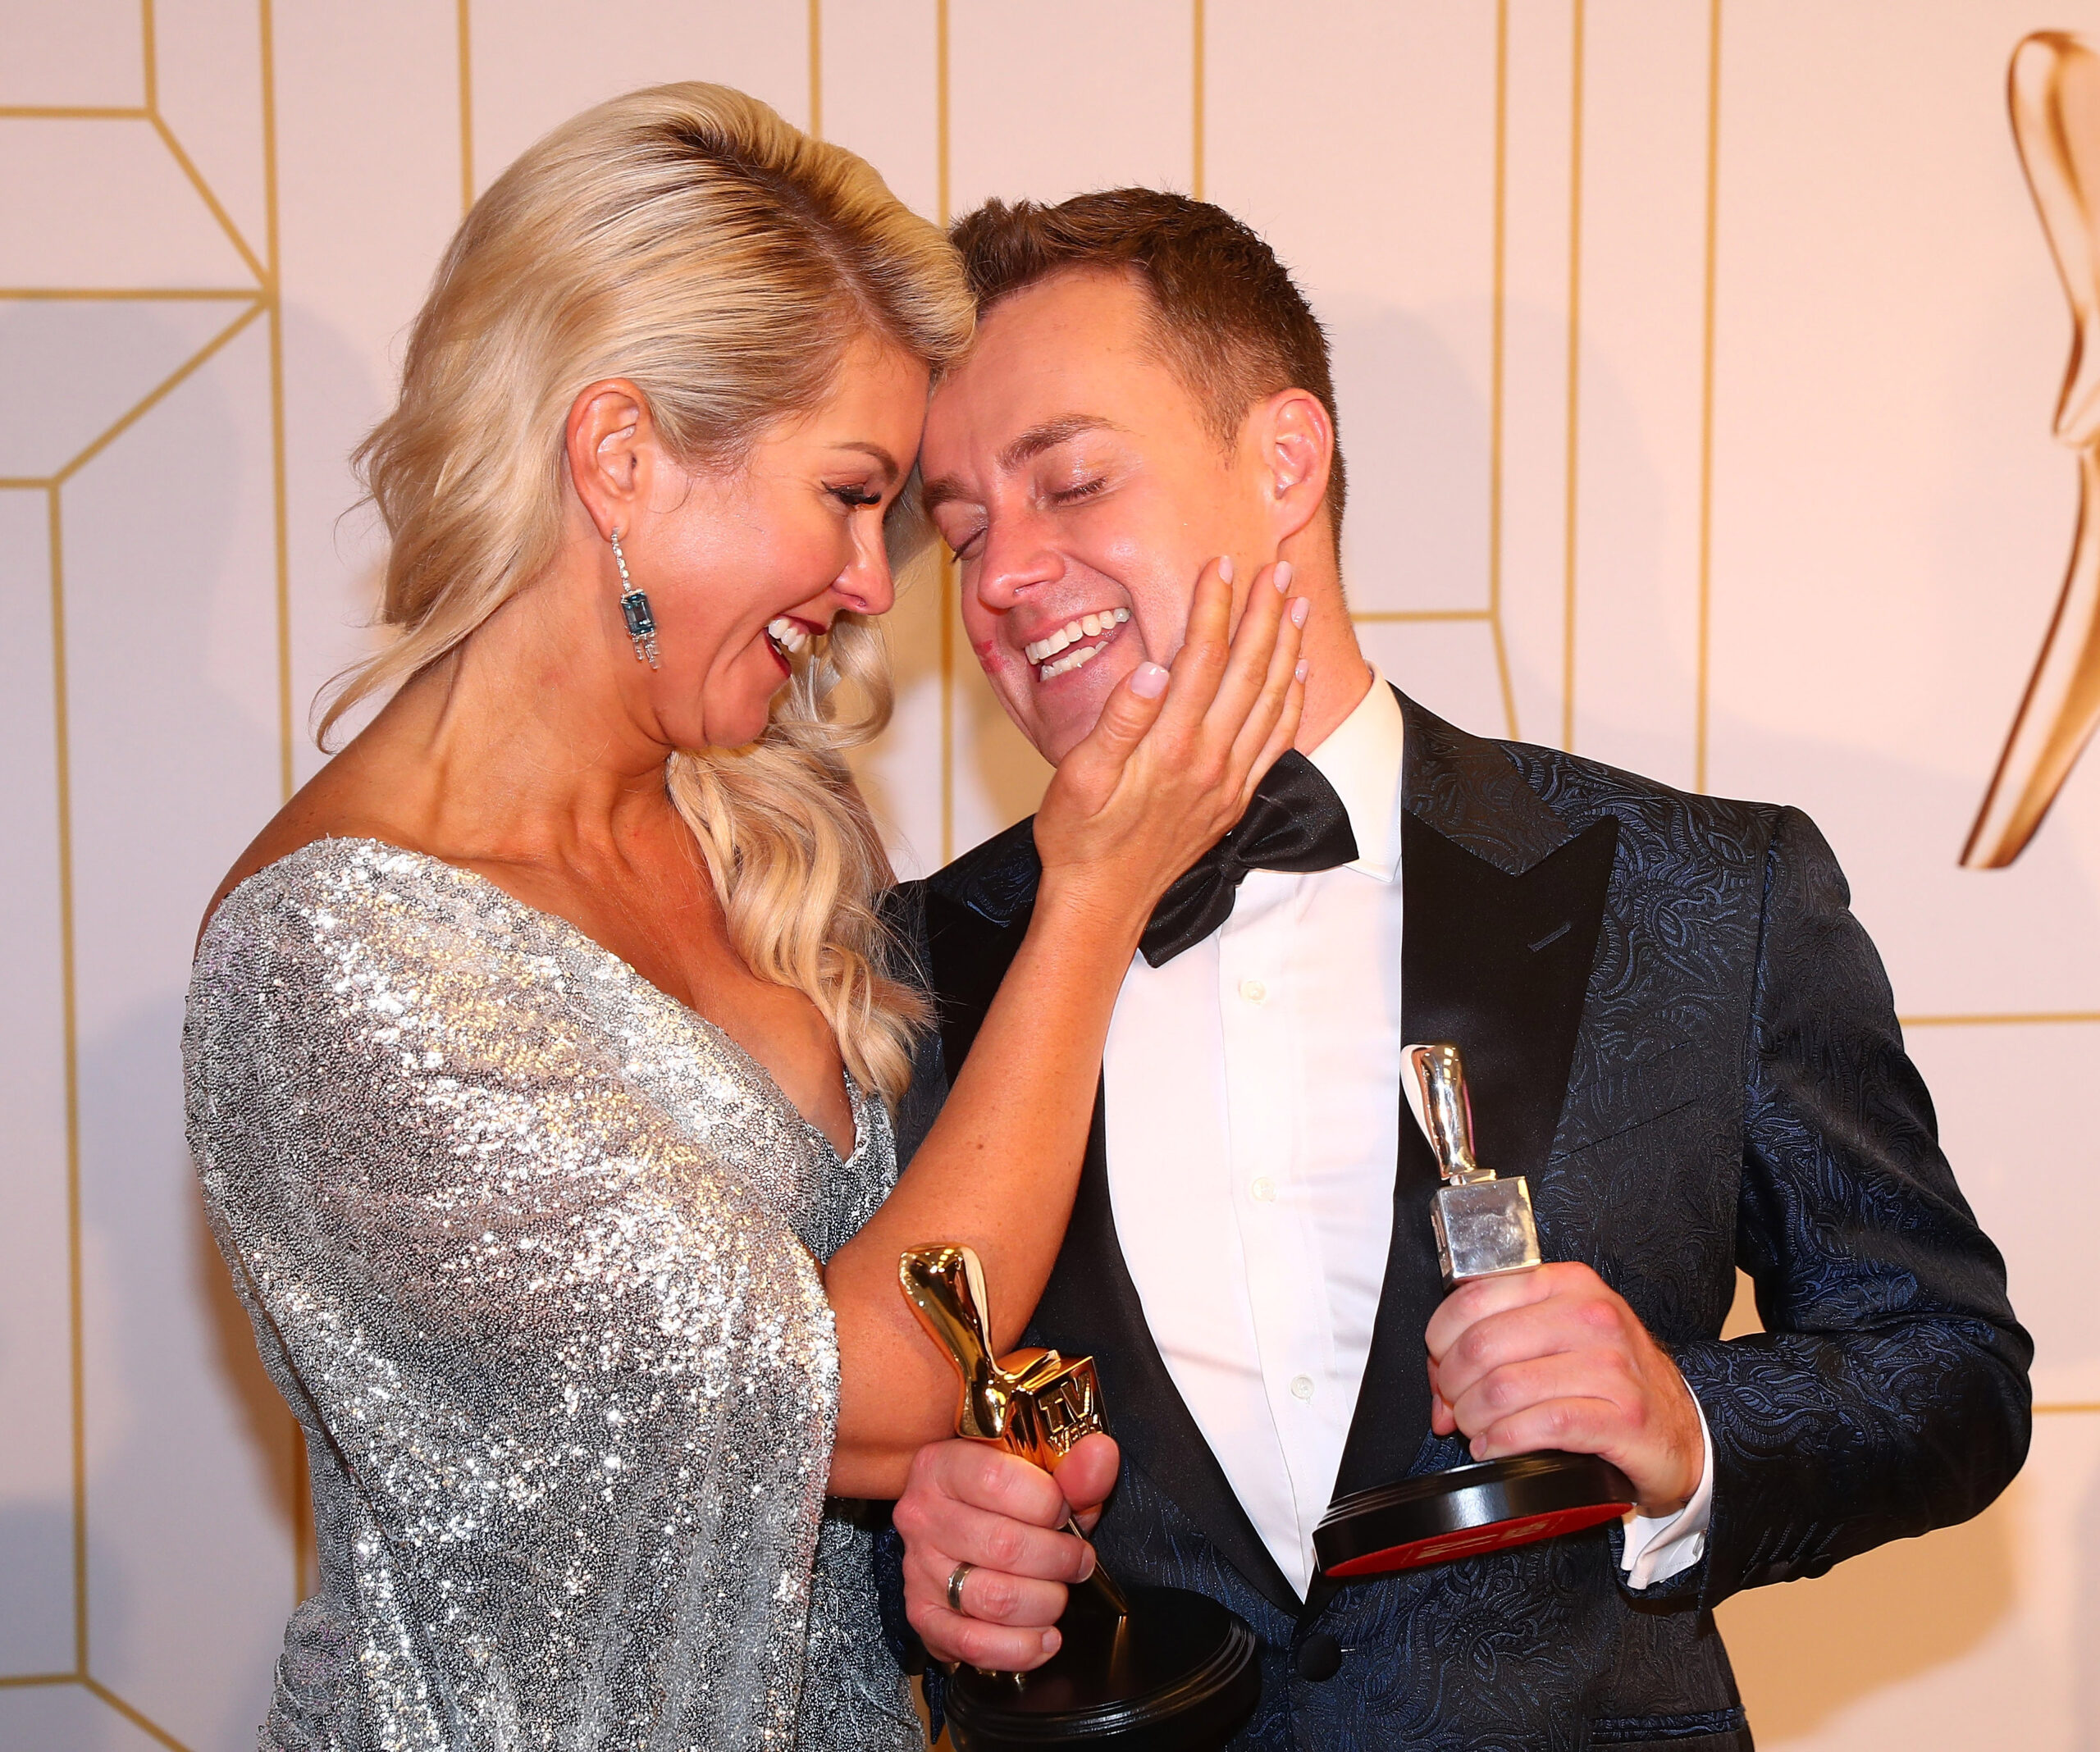 Grant Denyer just made a very real confession about having sex after children